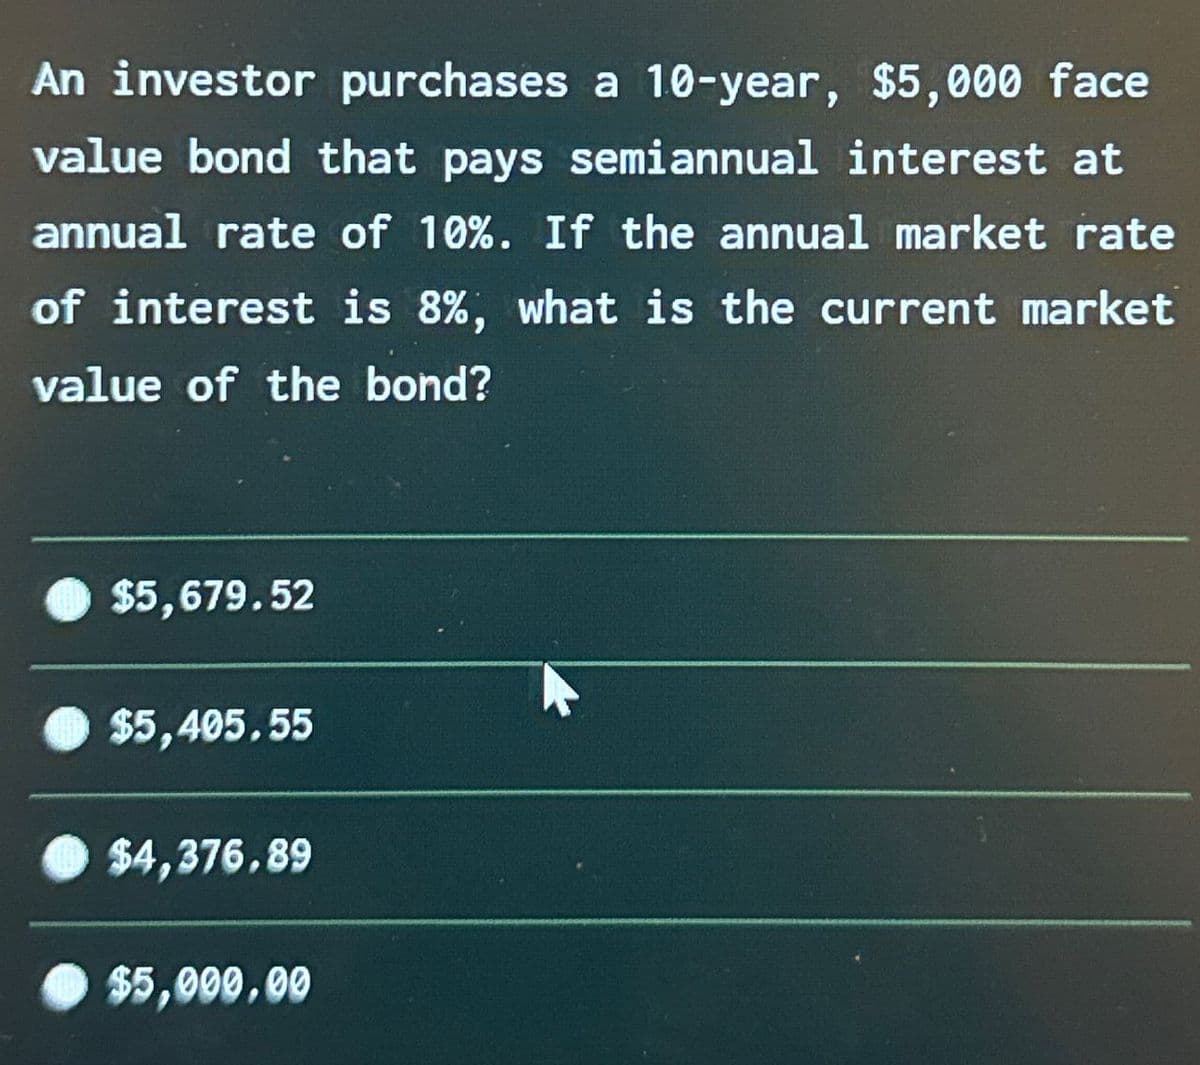 An investor purchases a 10-year, $5,000 face
value bond that pays semiannual interest at
annual rate of 10%. If the annual market rate
of interest is 8%, what is the current market
value of the bond?
$5,679.52
$5,405.55
$4,376.89
$5,000.00